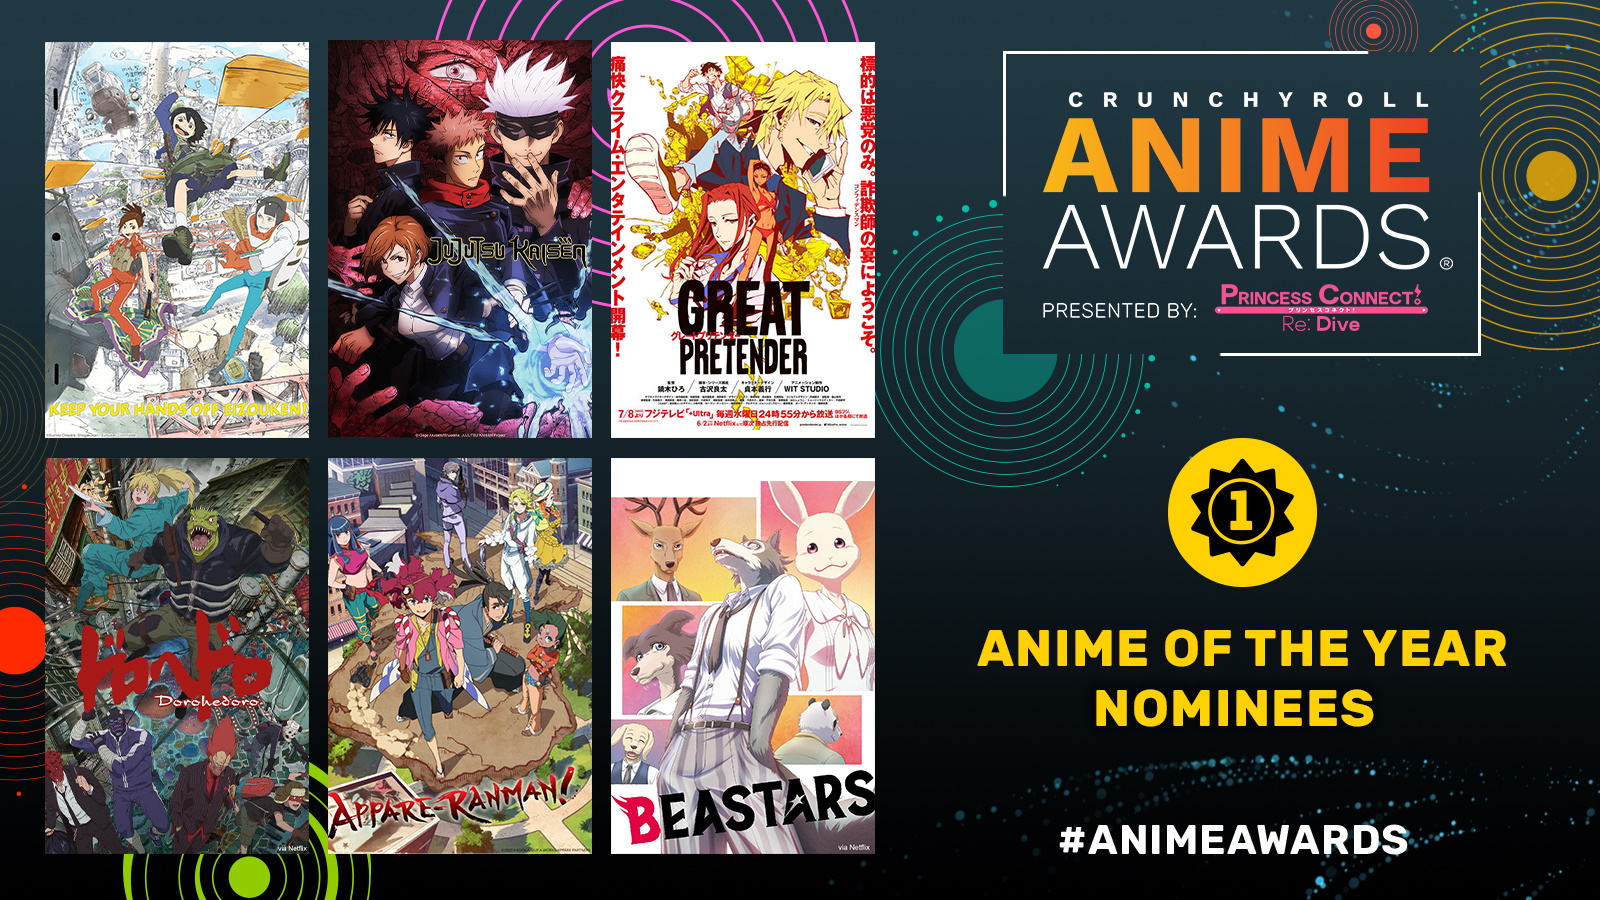 Crunchyroll's biggest anime of the year isn't the obvious choice